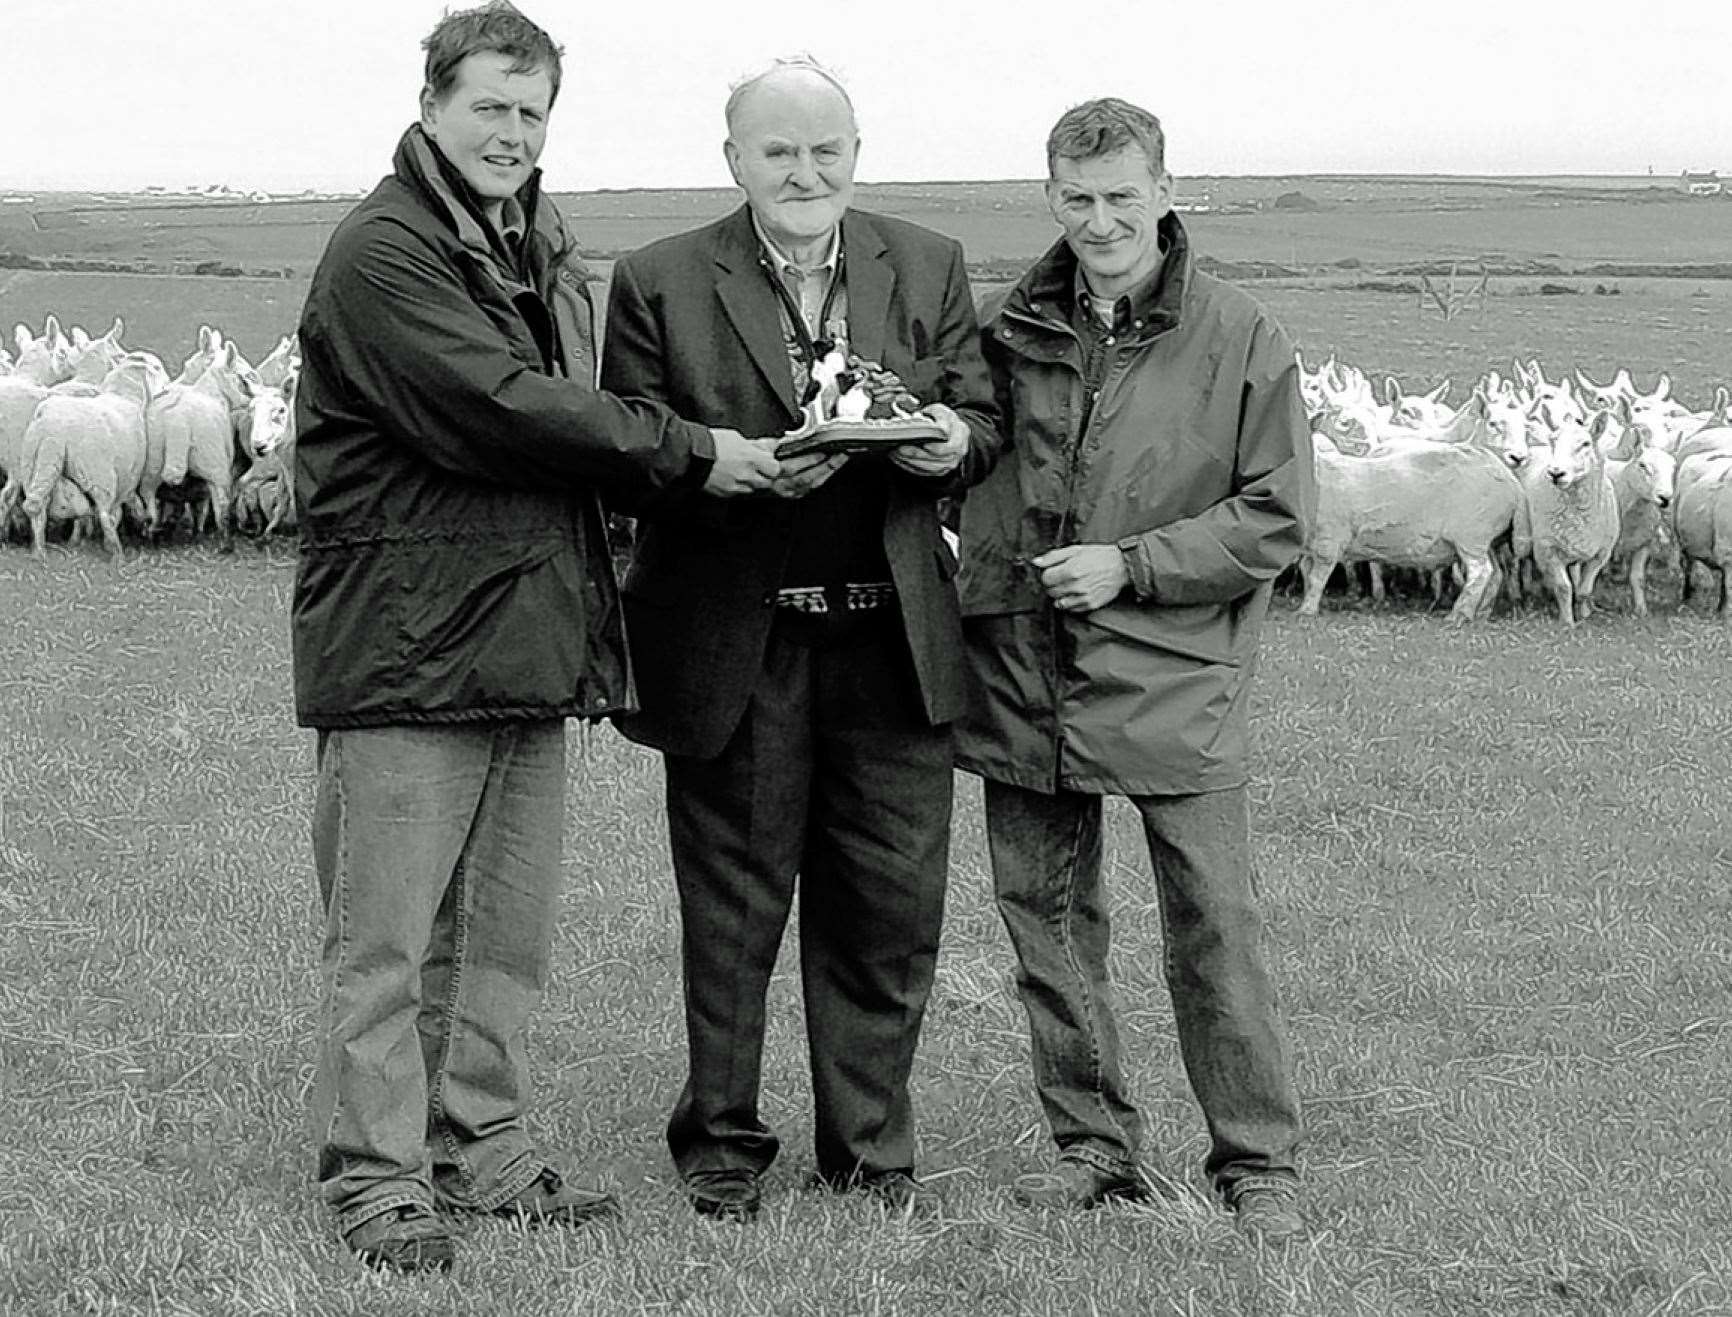 At the Mey Sheepdog Trials in 2006 Robert Banks received a presentation from chairman Alec Webster and secretary Dennis Simpson to mark his 60 years’ unbroken service as a committee member.